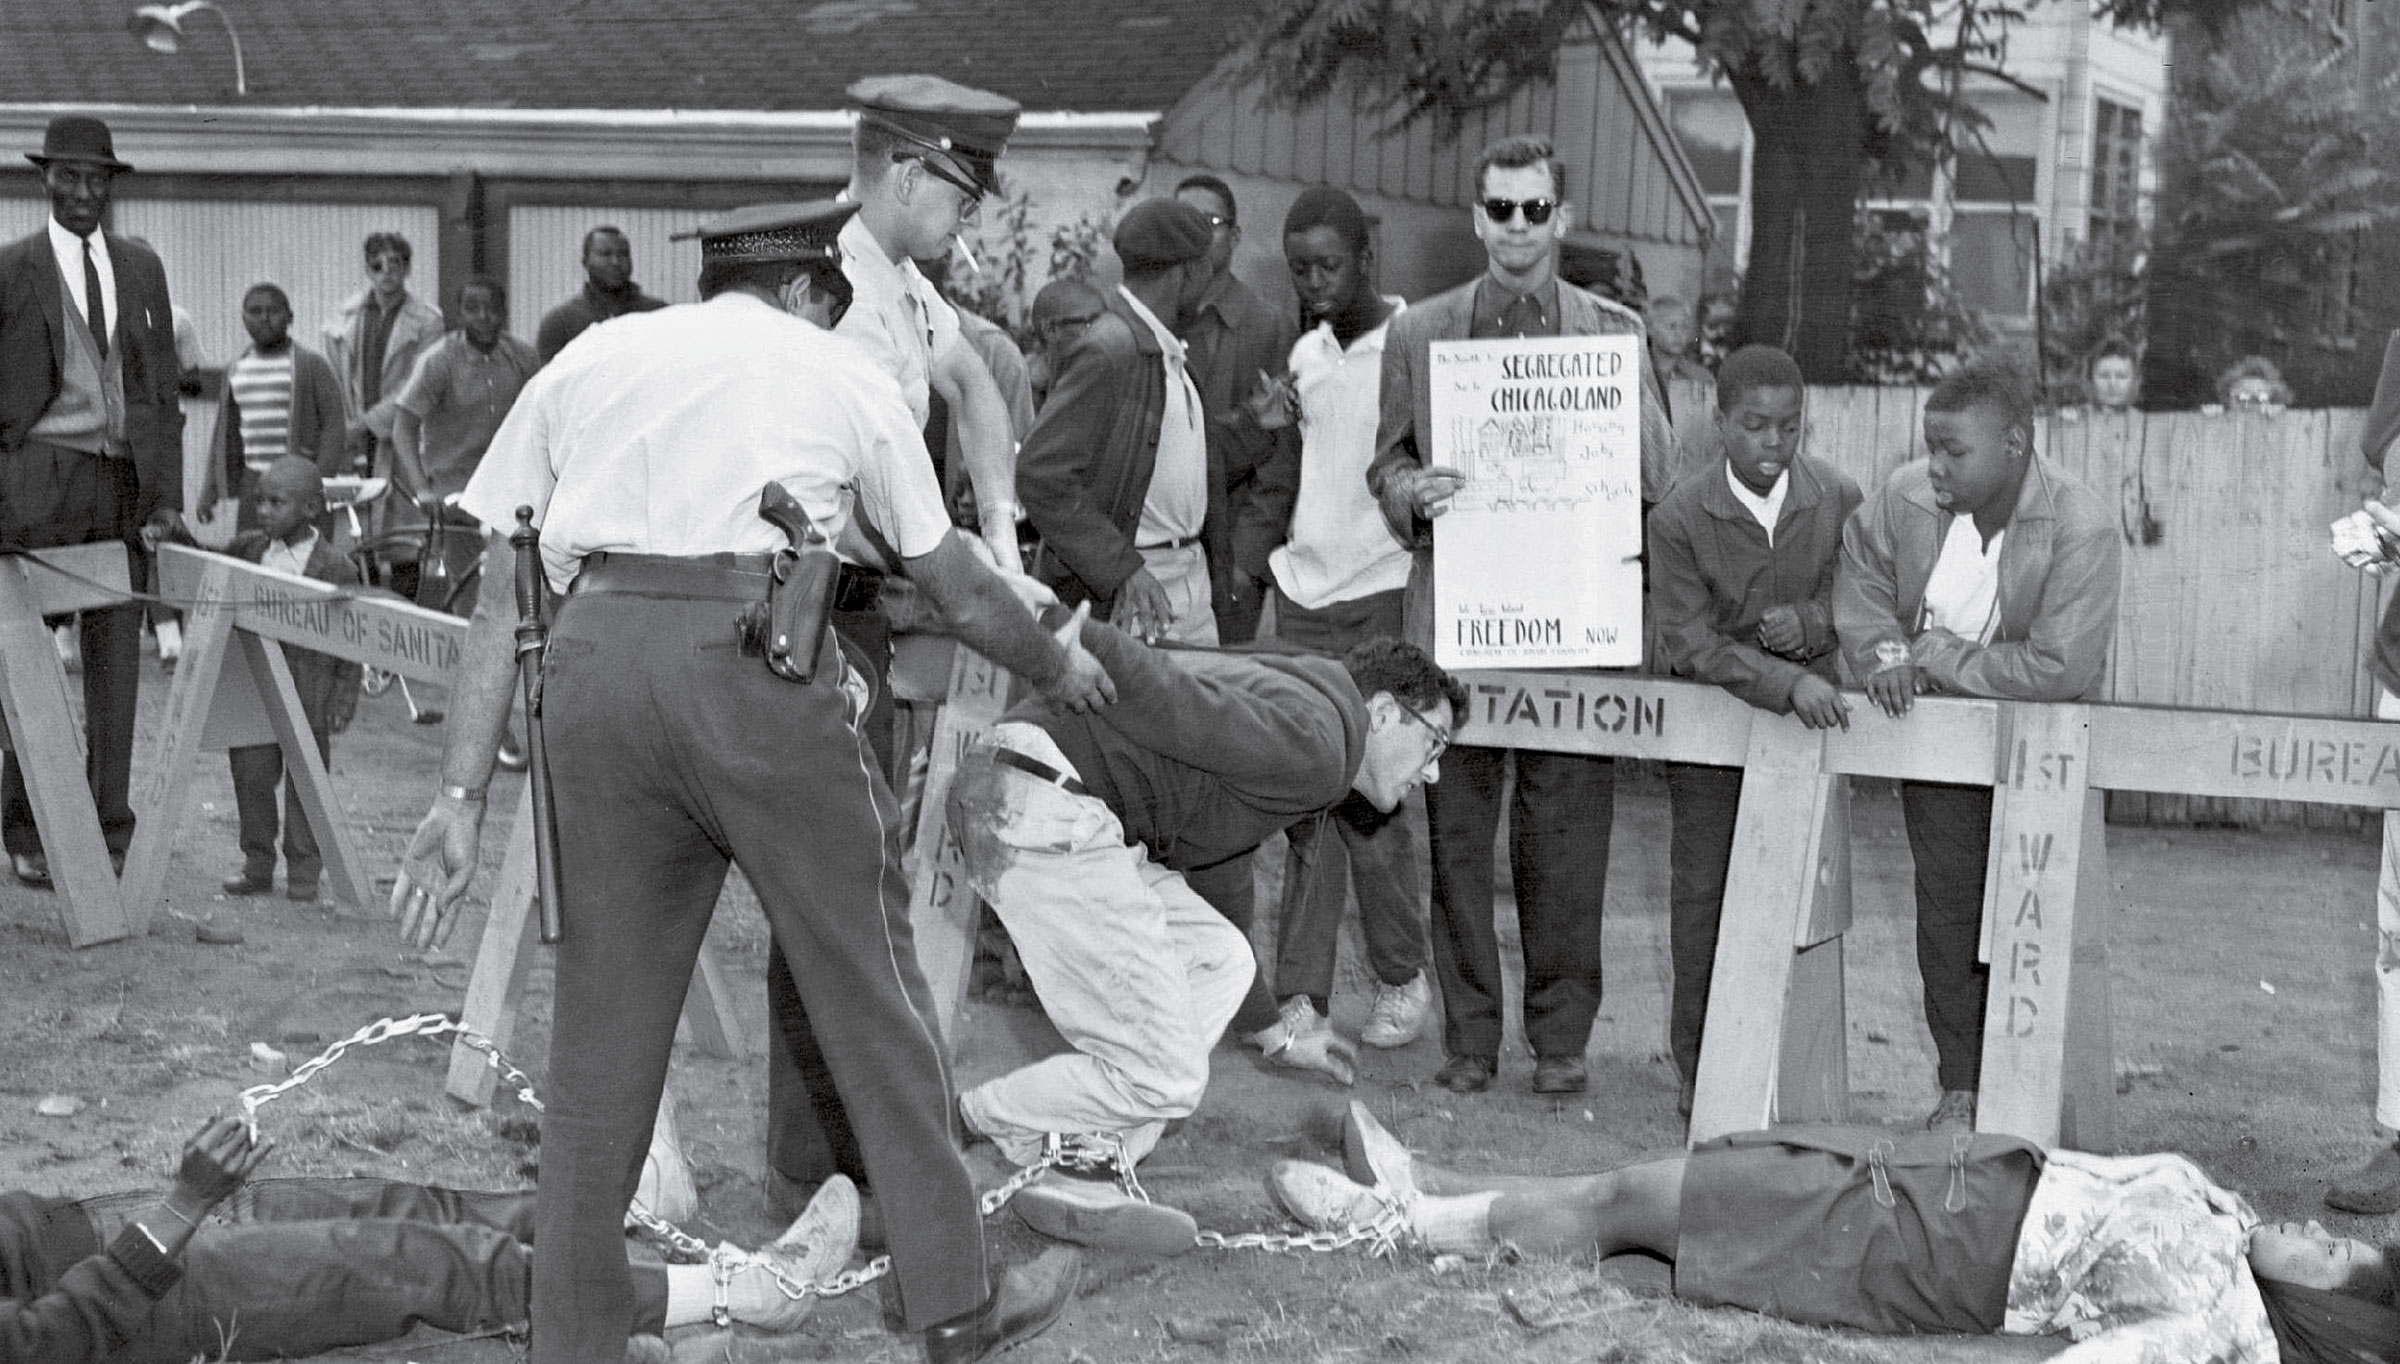 Sanders is arrested at a protest in Chicago in 1963 (Chicago Sun-Times © 1963 Used Under License)